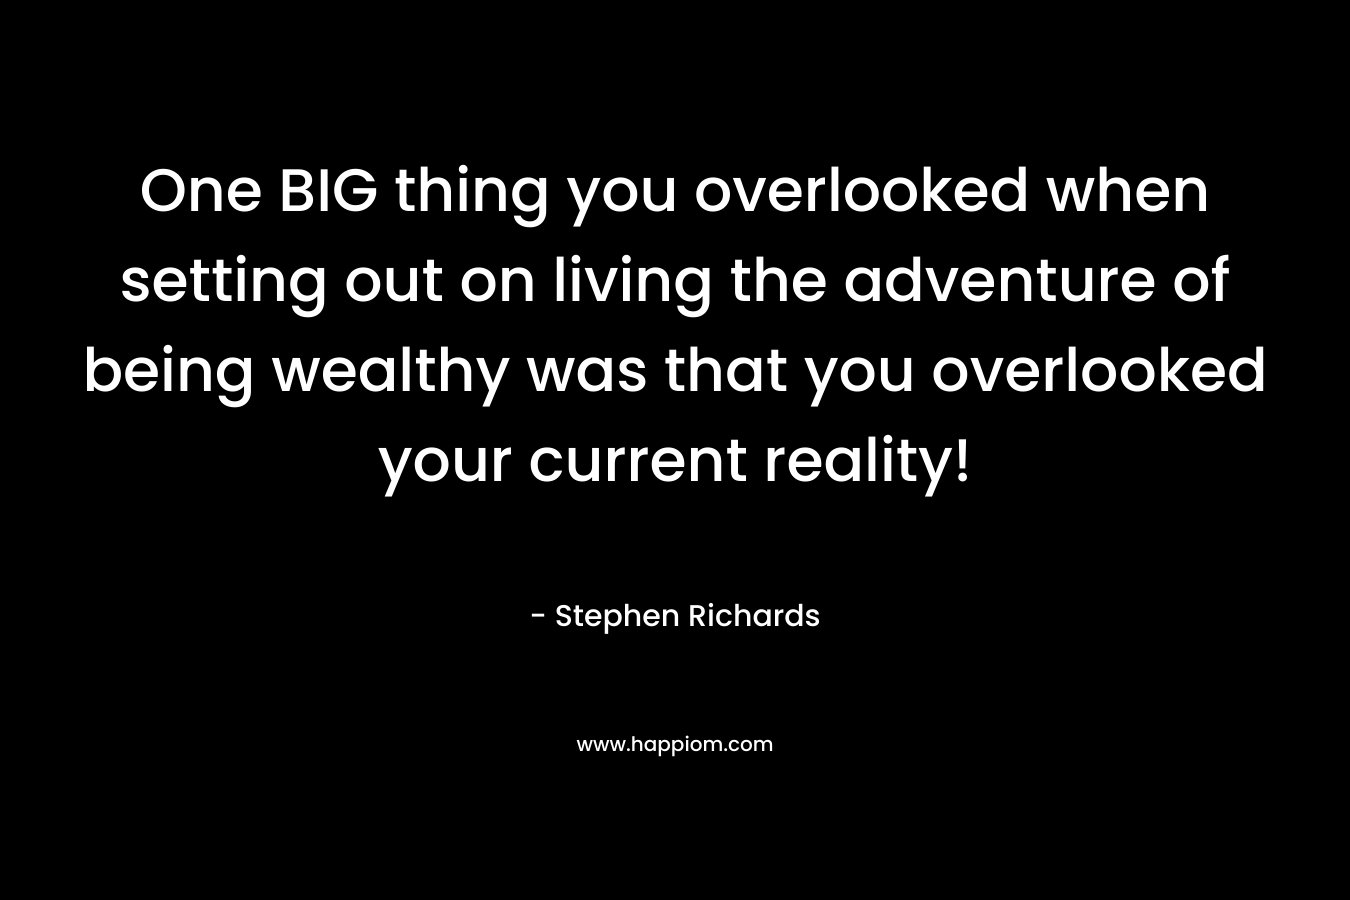 One BIG thing you overlooked when setting out on living the adventure of being wealthy was that you overlooked your current reality! – Stephen Richards